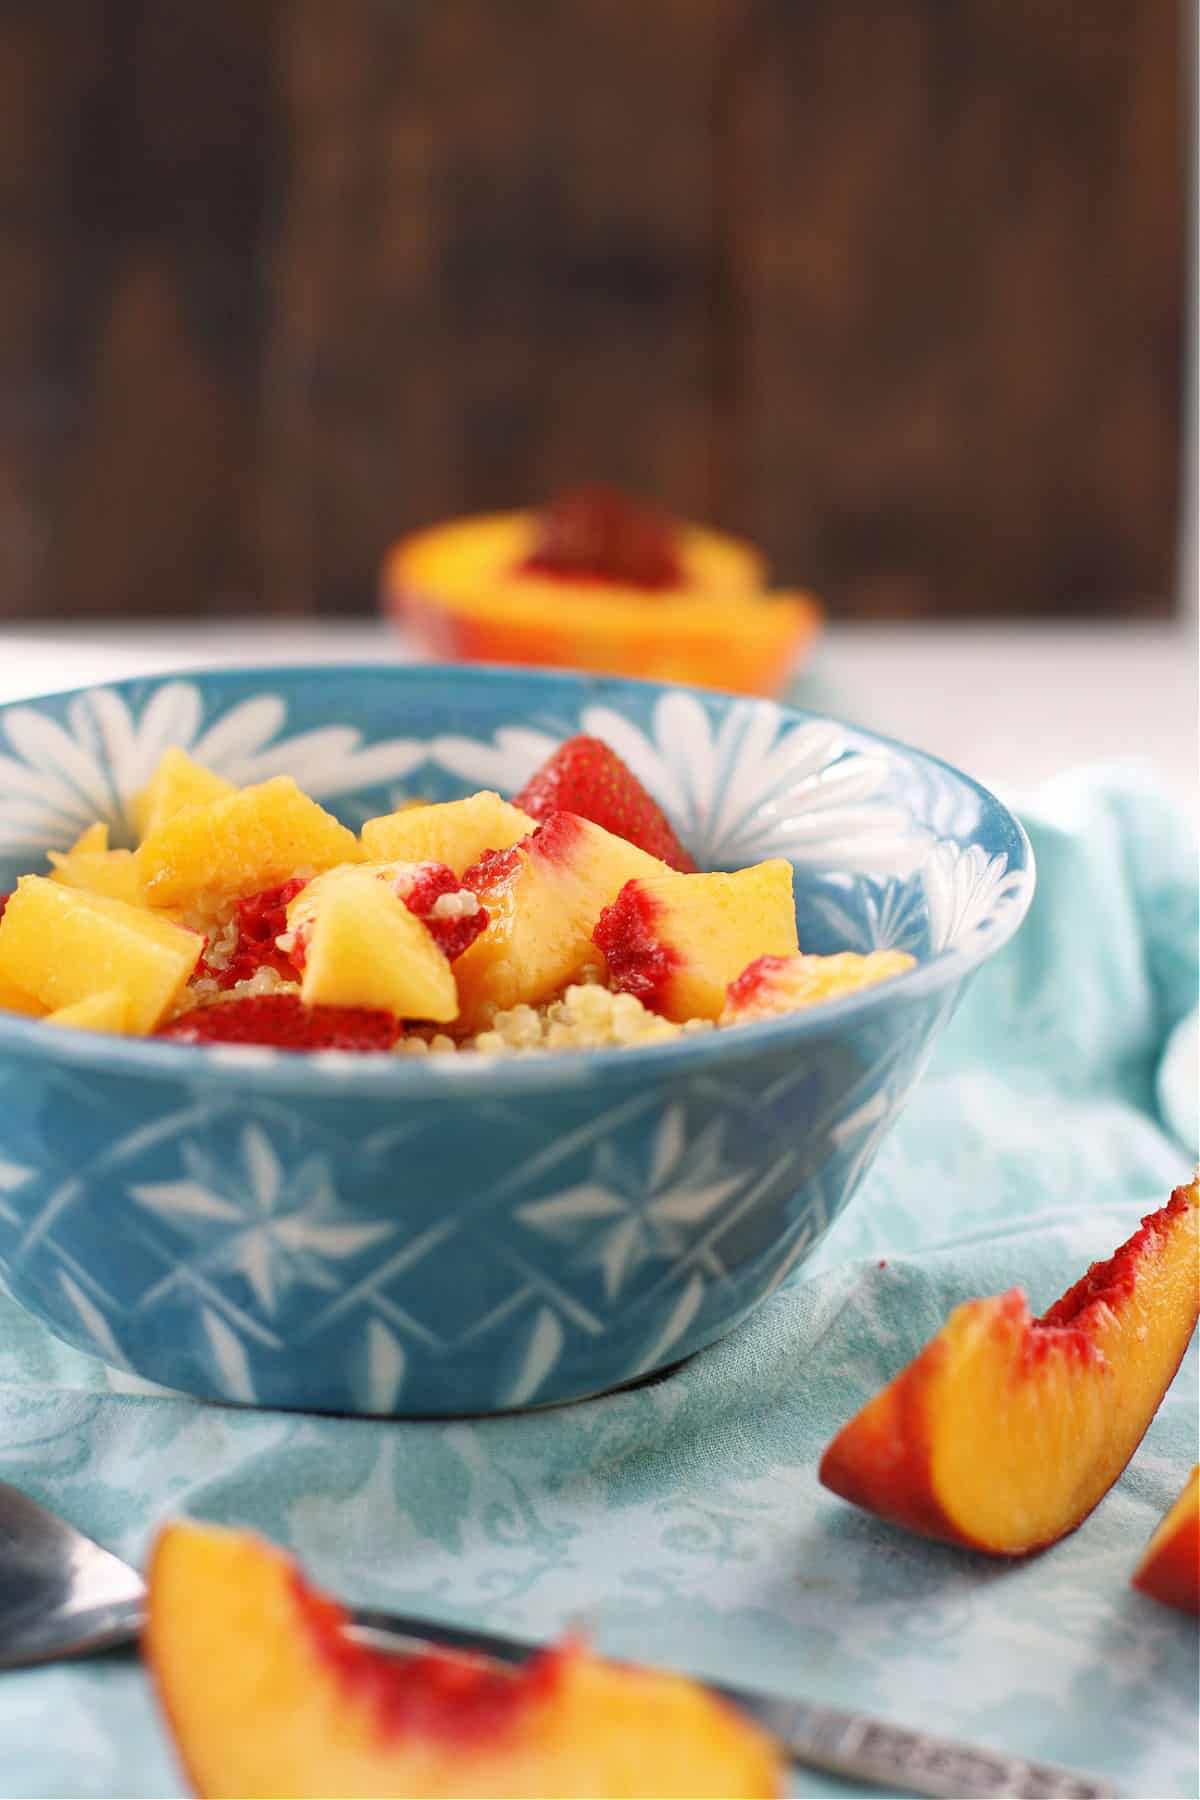 quinoa breakfast cereal with peaches in a blue and white bowl